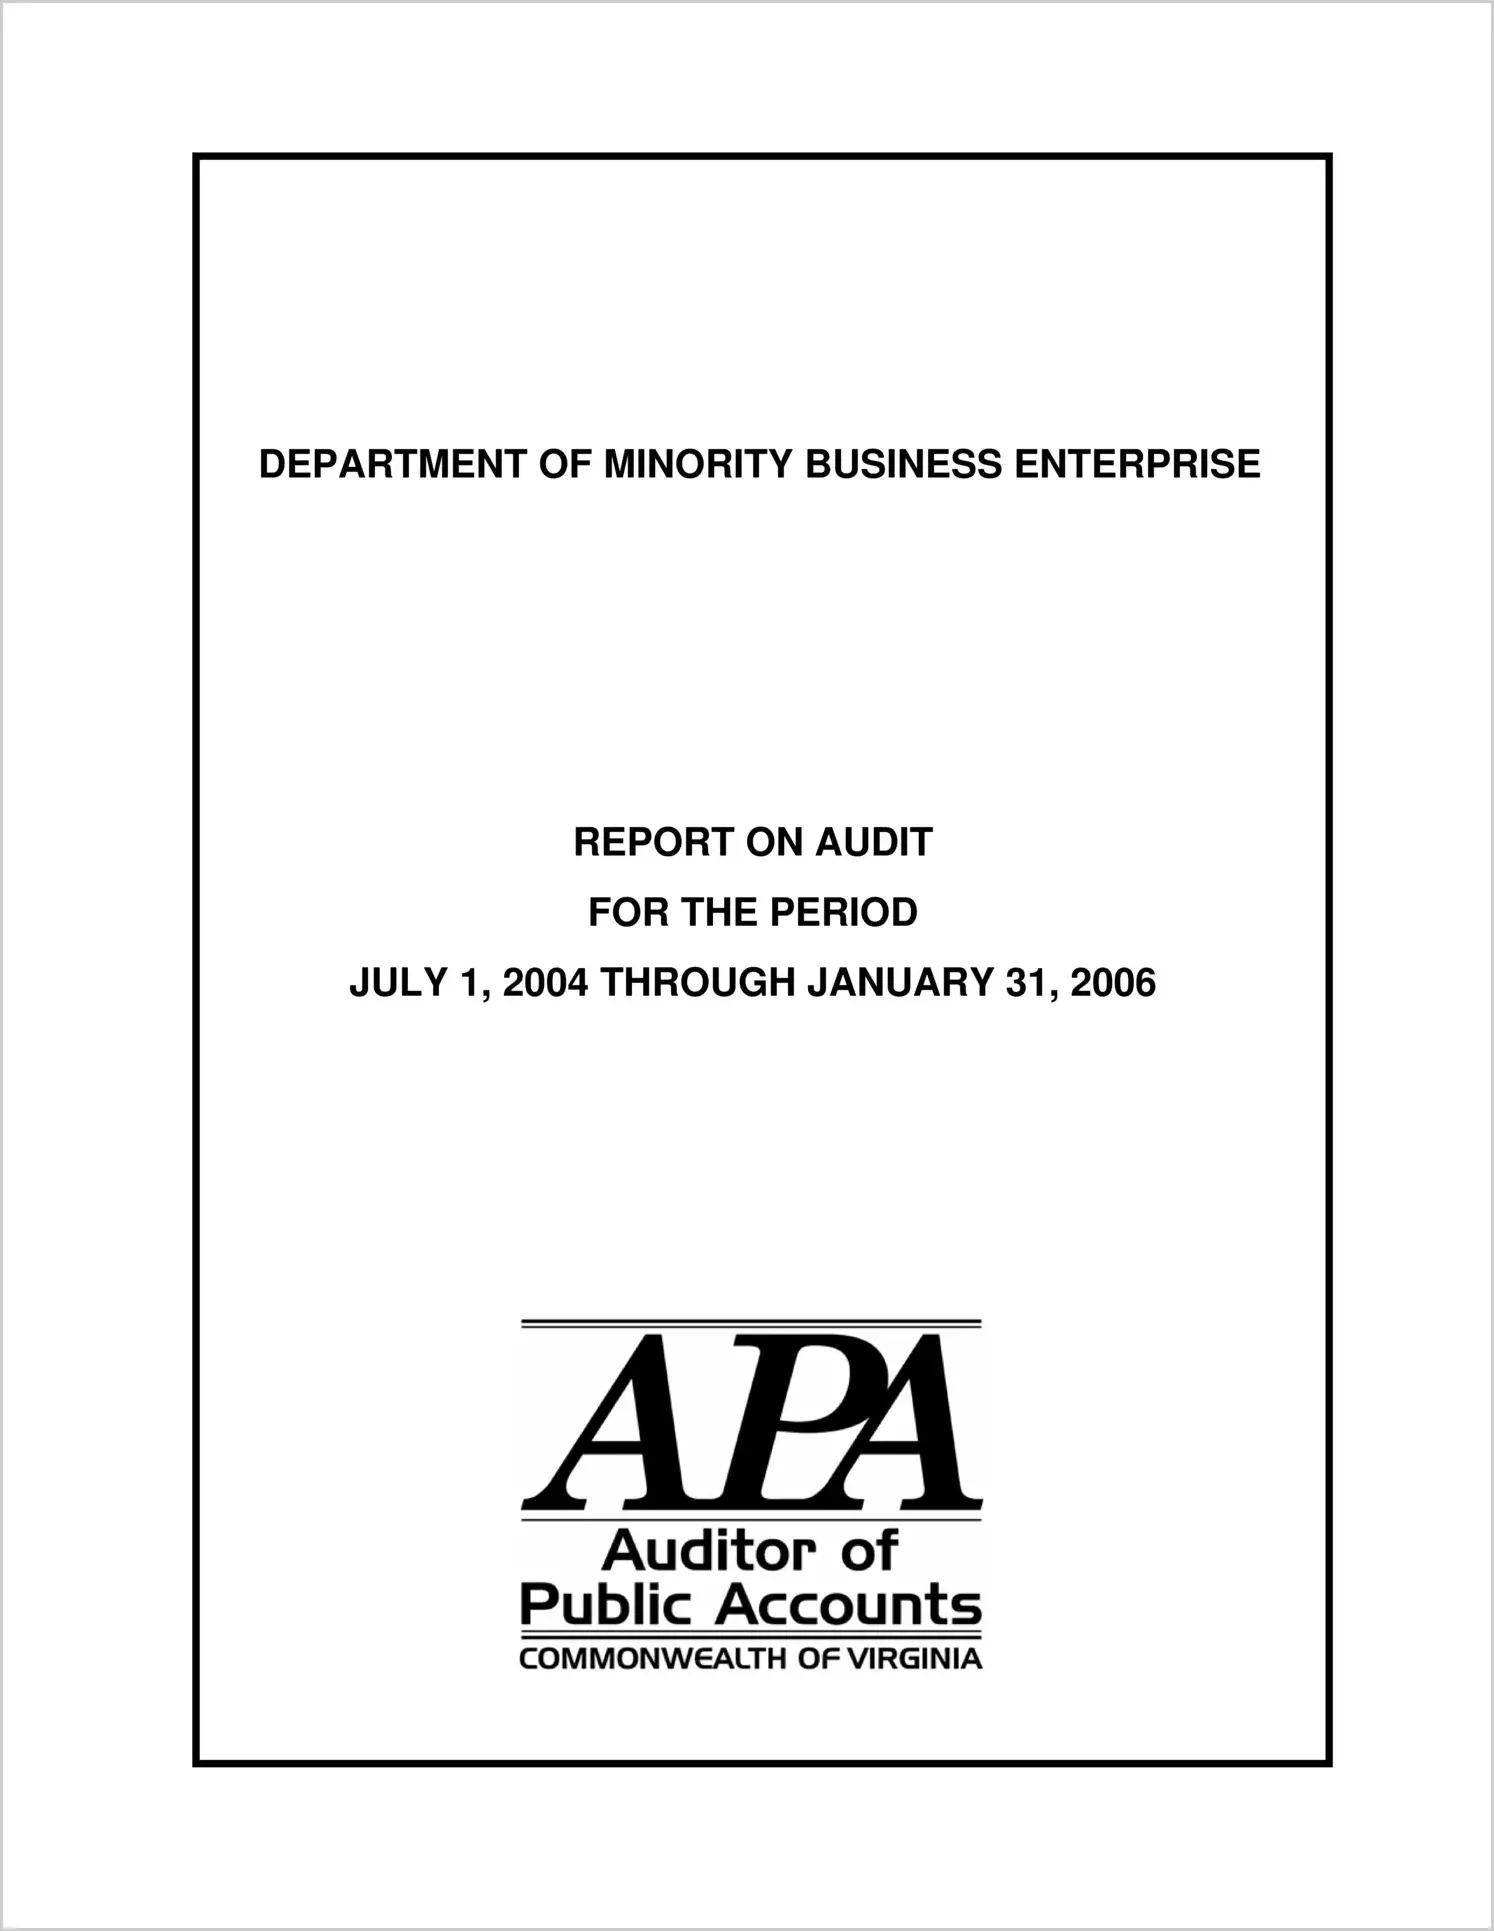 Department of Minority Business Enterprise for the period July 1, 2004, through January 31, 2006